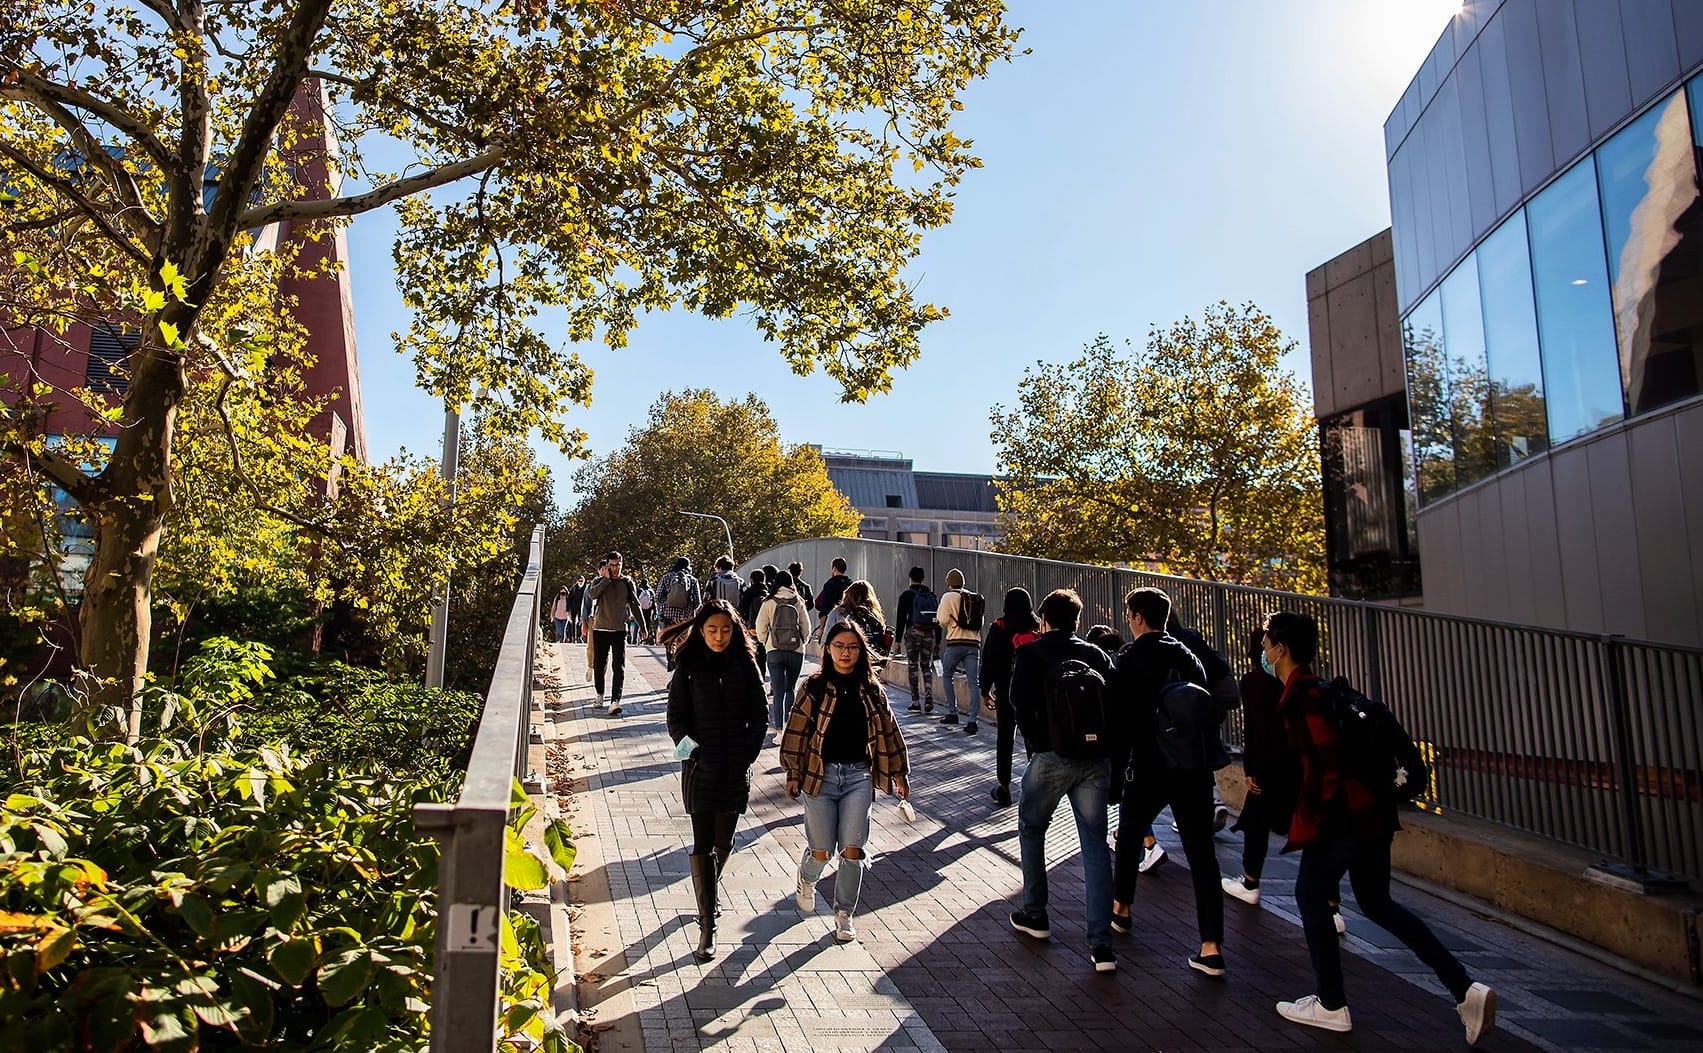 Students walking on a pathway on the University of Pennsylvania's campus.